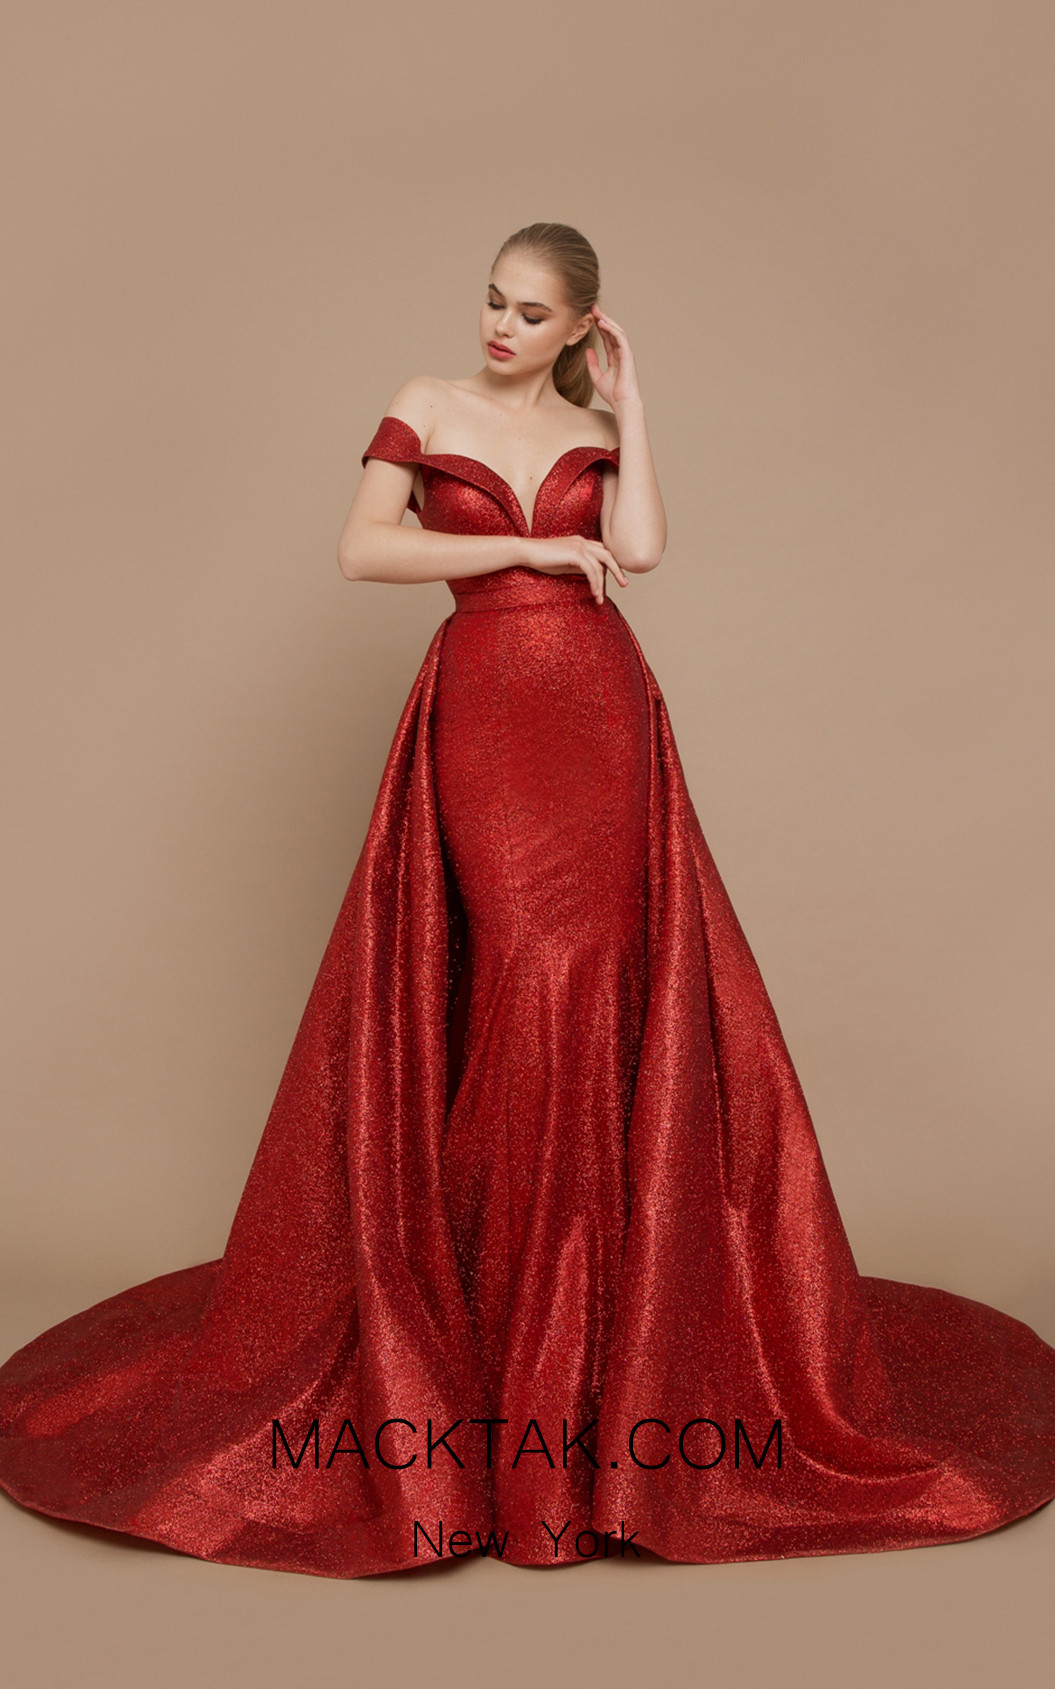 Ricca Sposa Grammy Red Front Dress